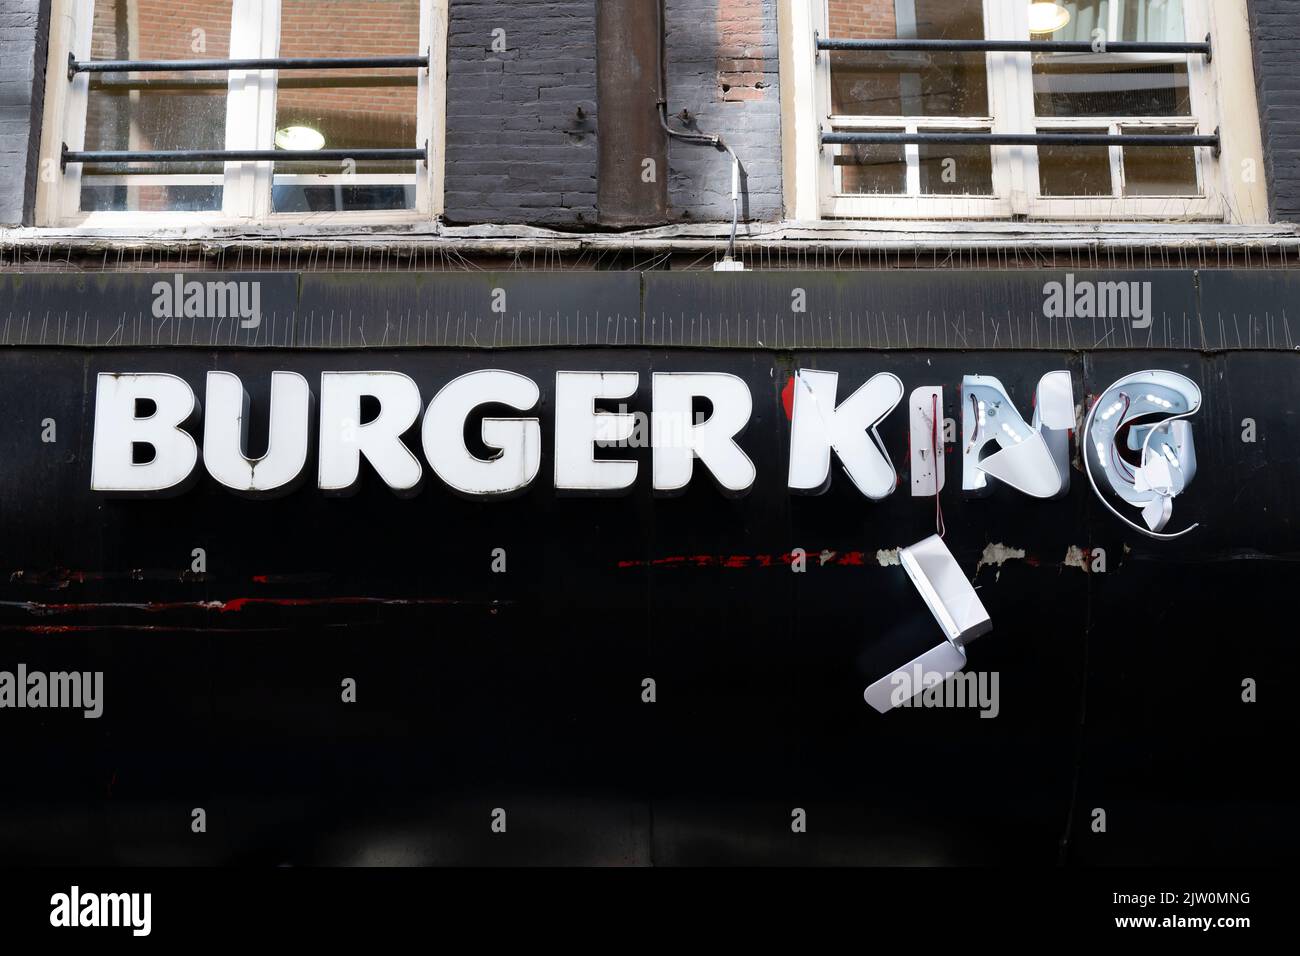 A damaged Burger King restaurant sign in Amsterdam, Holland. Stock Photo